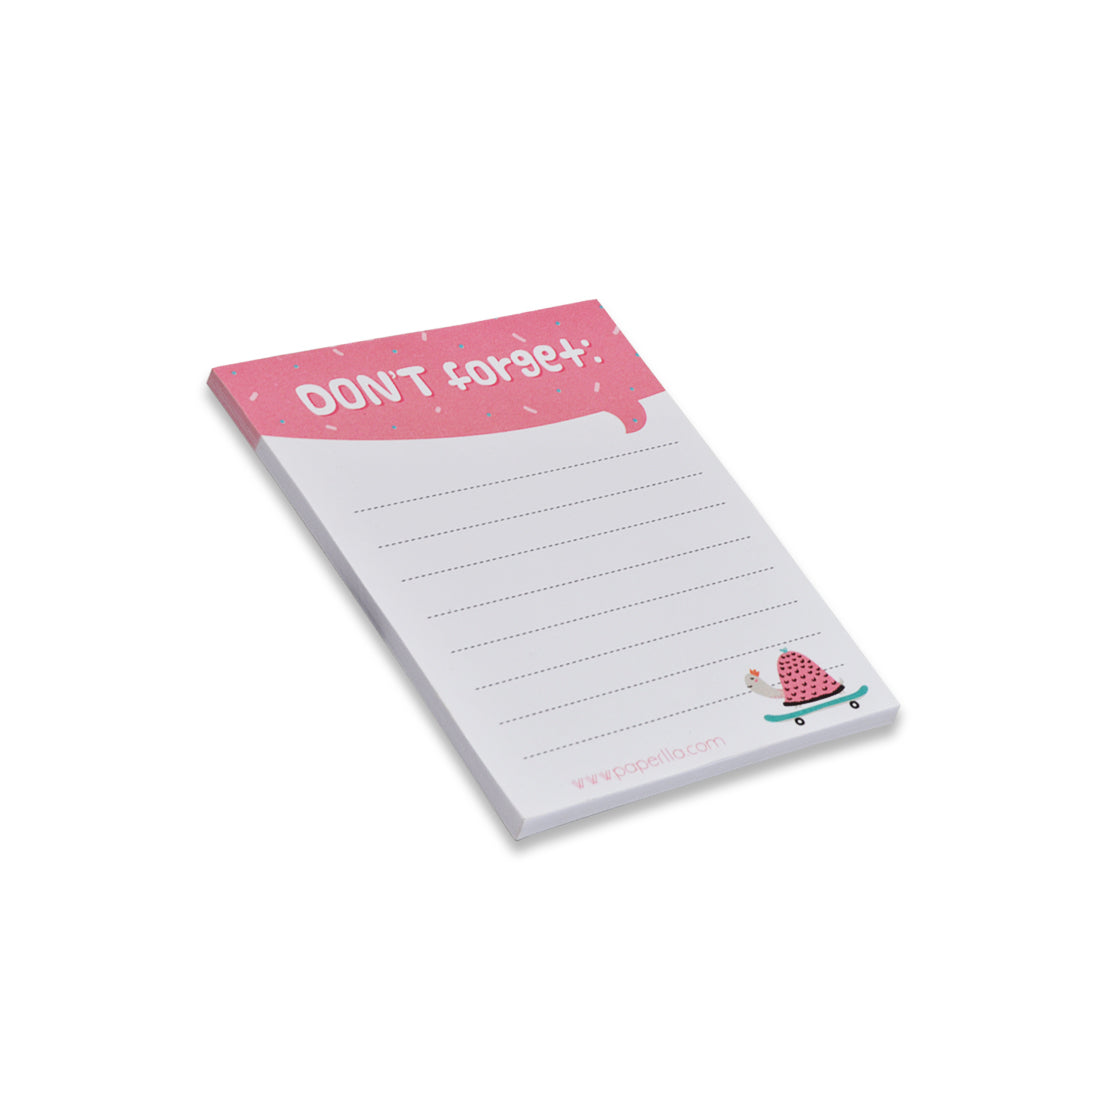 To do List- Stylish Notepads for Grocery List, Shopping List, to-Do List Modern Design Notepads | 50 Sheets per Pad | Set of 6 Writing Pads